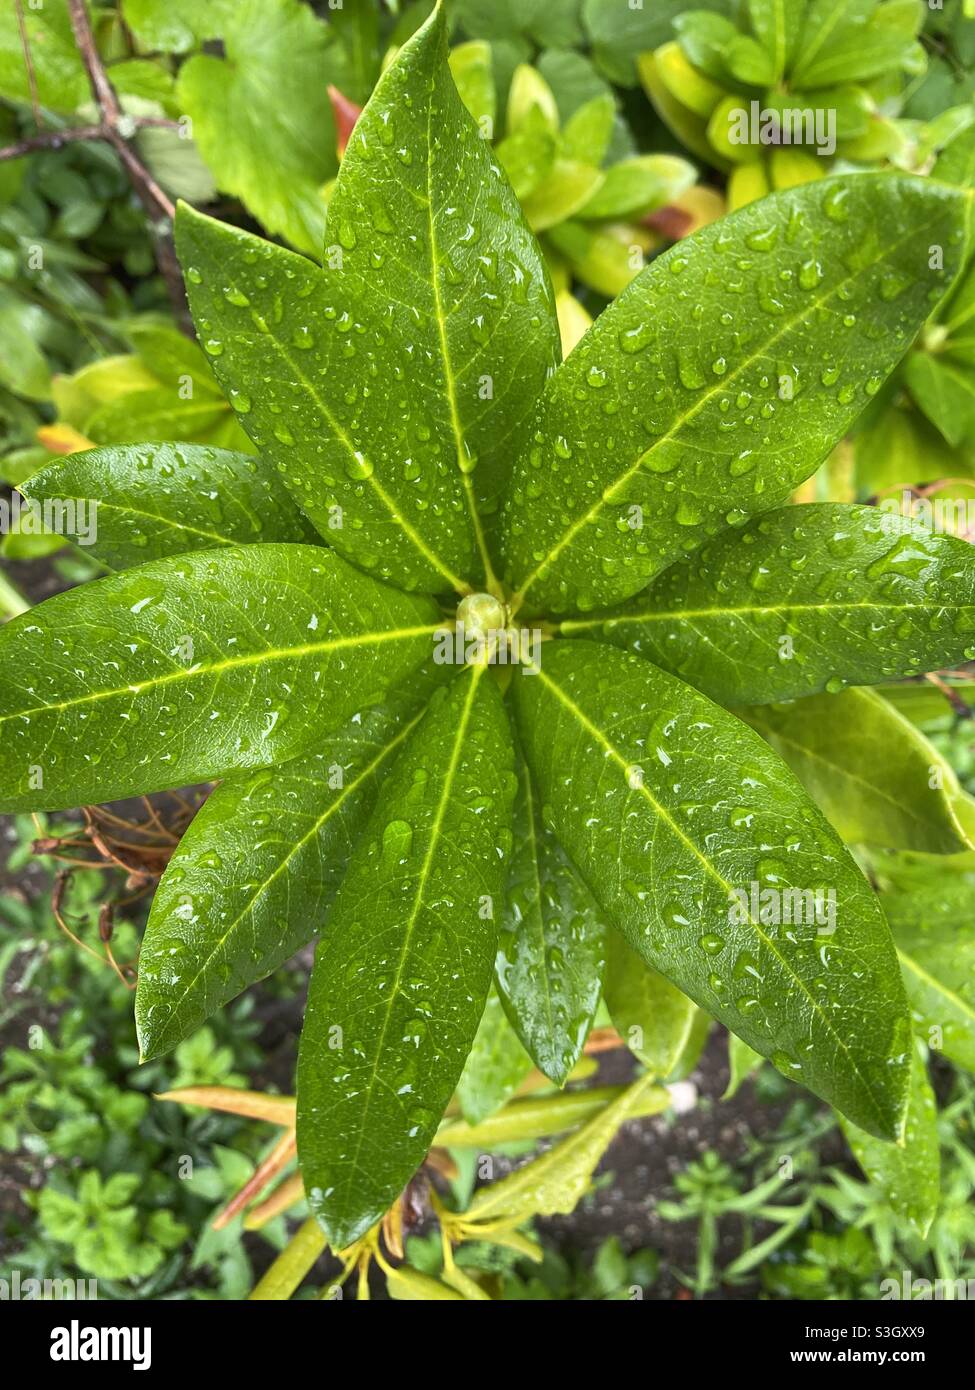 Rain drops on green leaves in the garden Stock Photo